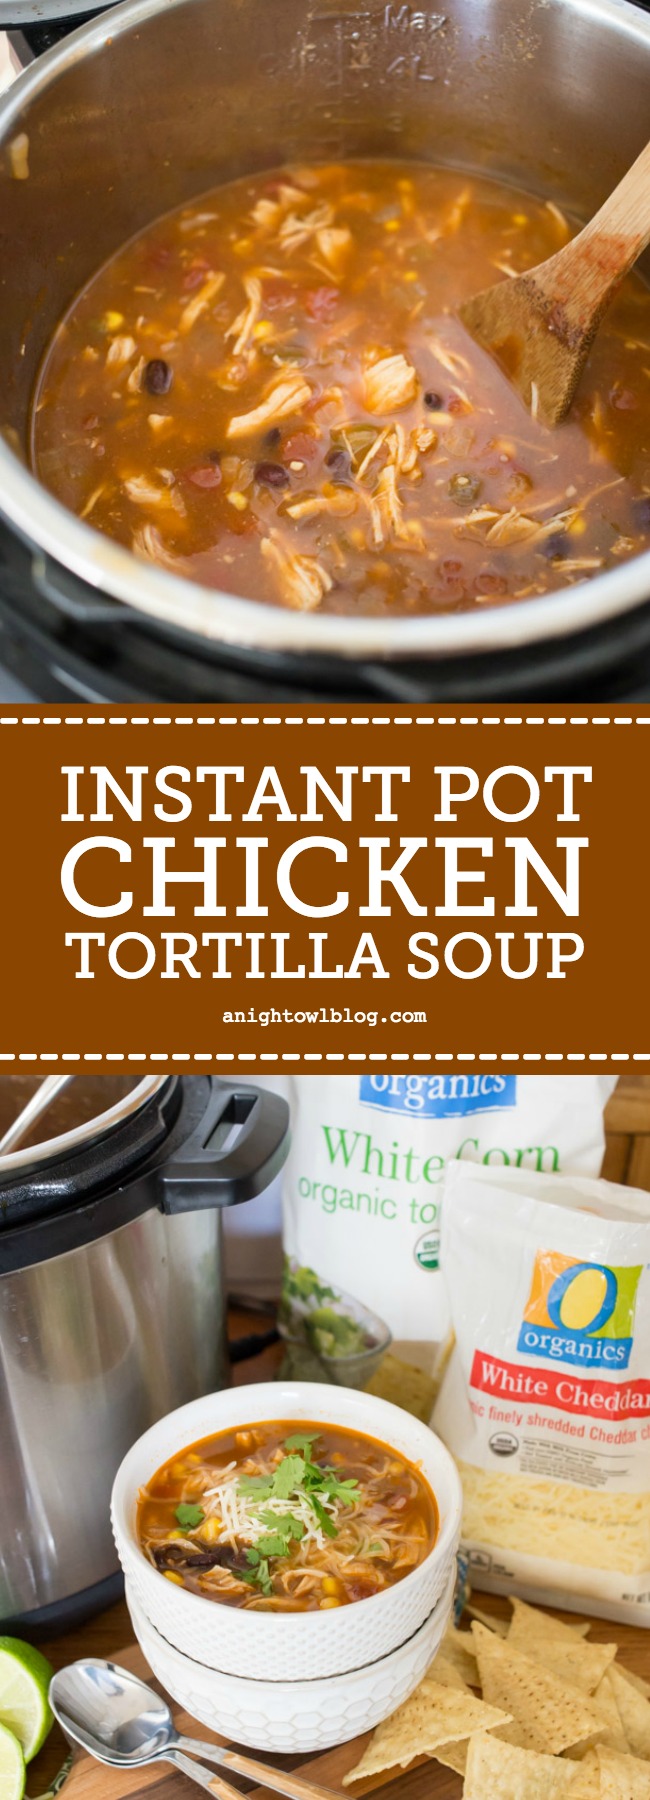 Make some Instant Pot Chicken Tortilla Soup for a warm, comforting weeknight meal. Perfect for chilly fall nights!